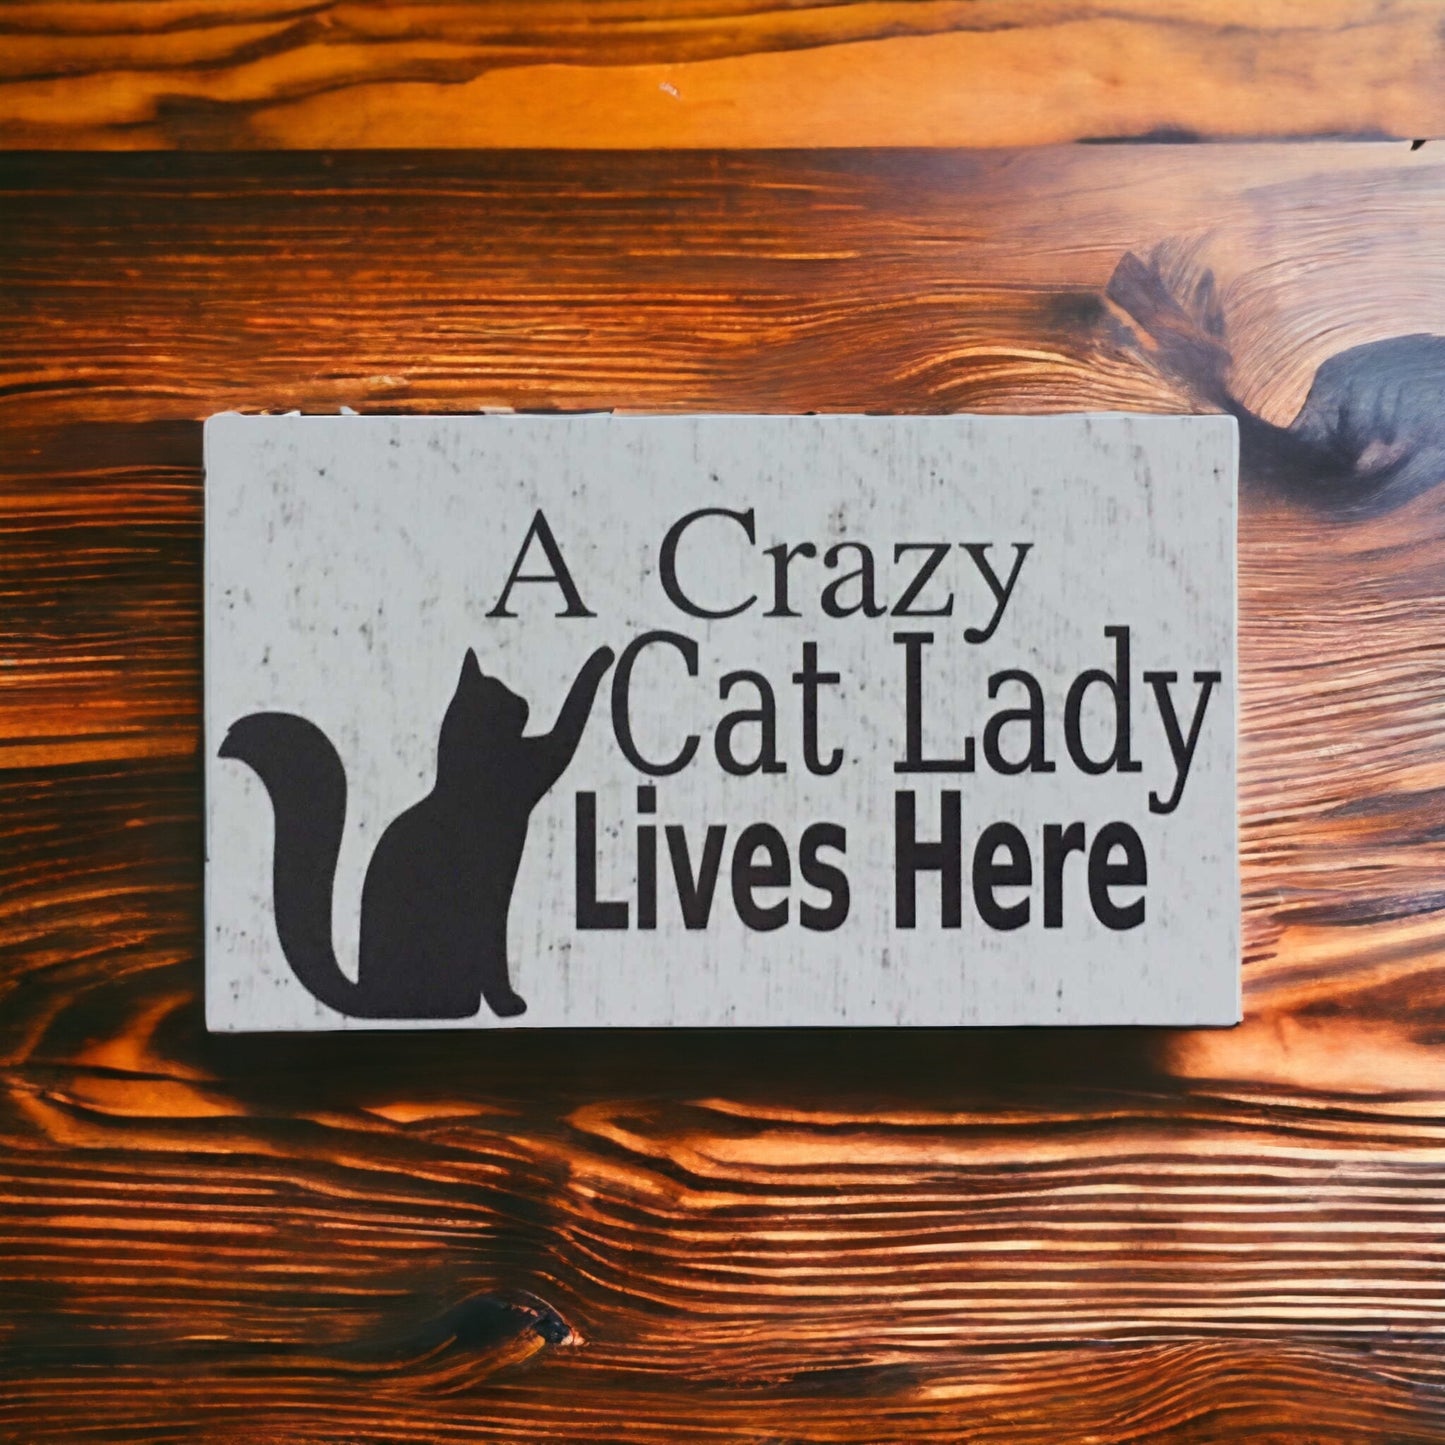 Crazy Cat Lady Lives Here Sign - The Renmy Store Homewares & Gifts 